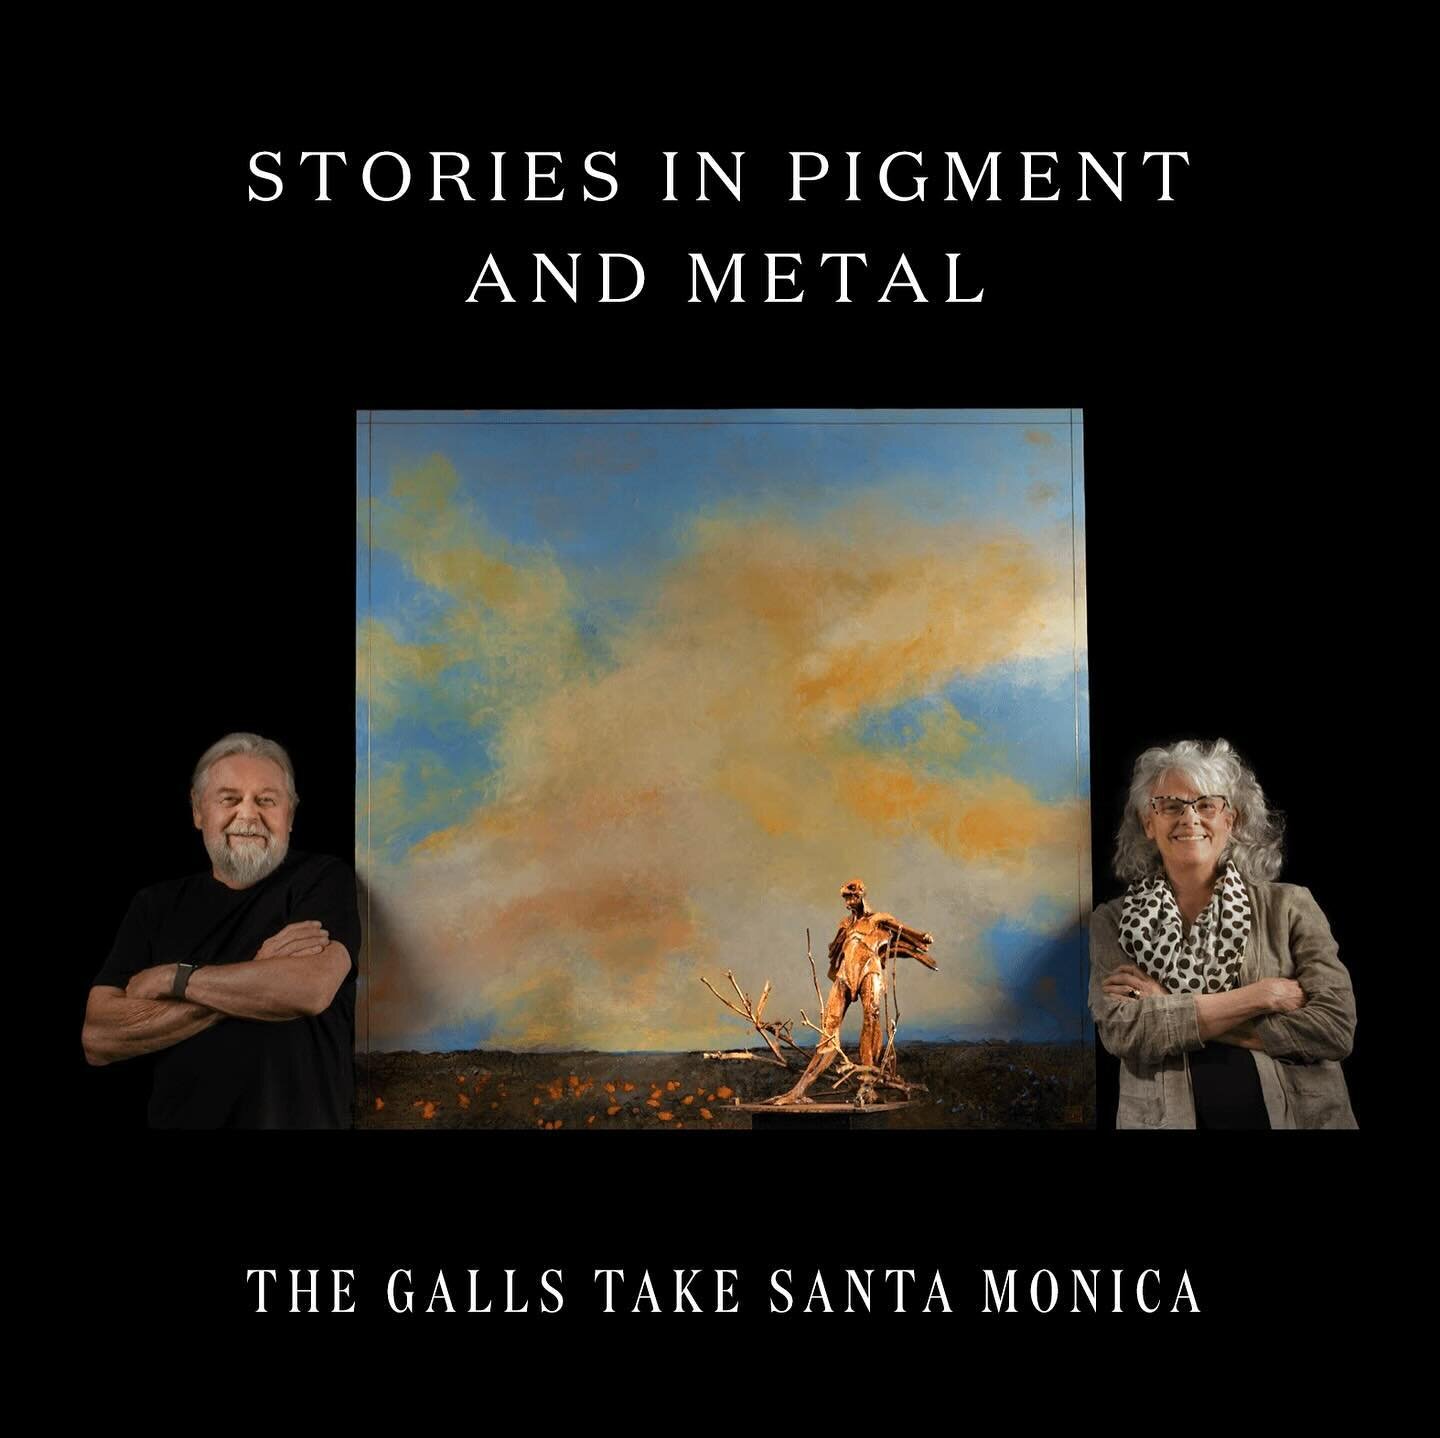 Ojai artists&nbsp;Ted and Wrona Gall invade Santa Monica! Opening this weekend at Bergamot Station's acclaimed bG Gallery, this show is&nbsp;a spellbinding joint exhibition, &ldquo;Stories in Pigment &amp; Metal,&rdquo; on view from November 11th to 